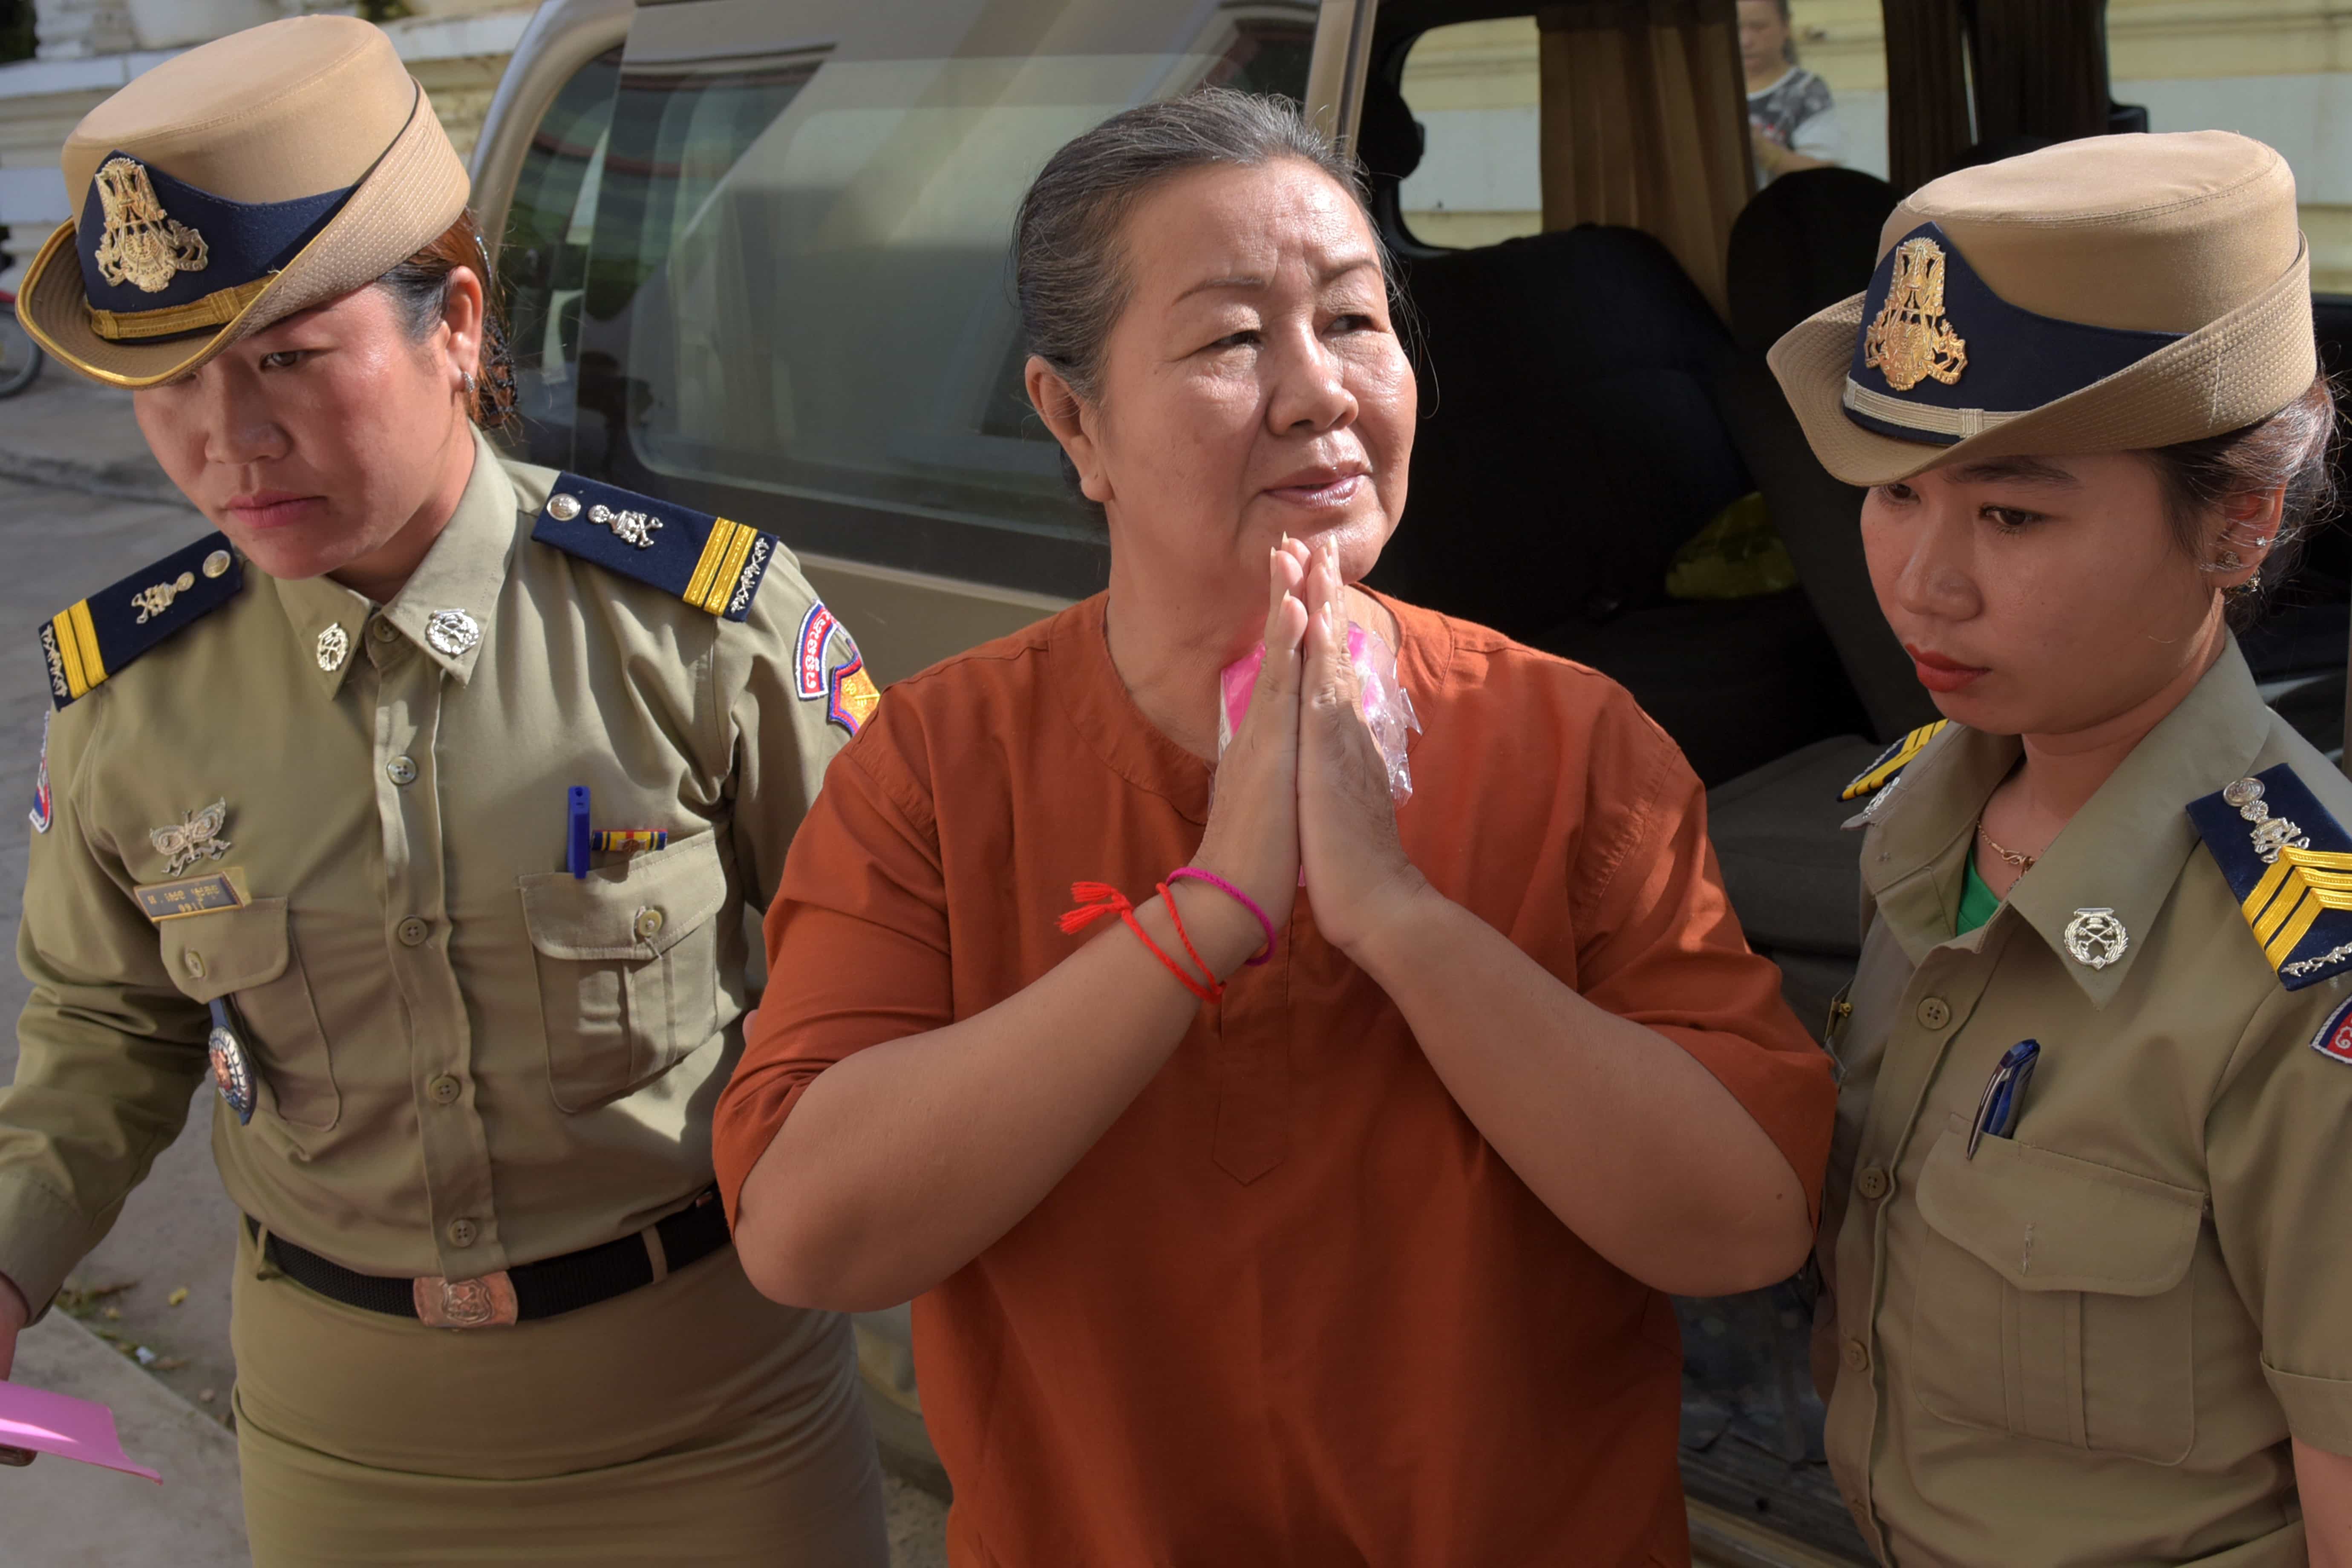 ADHOC 5 member, Lim Mony, escorted by police officials outside the appeals court in Phnom Penh, 30 August 2016, TANG CHHIN SOTHY/AFP/Getty Images